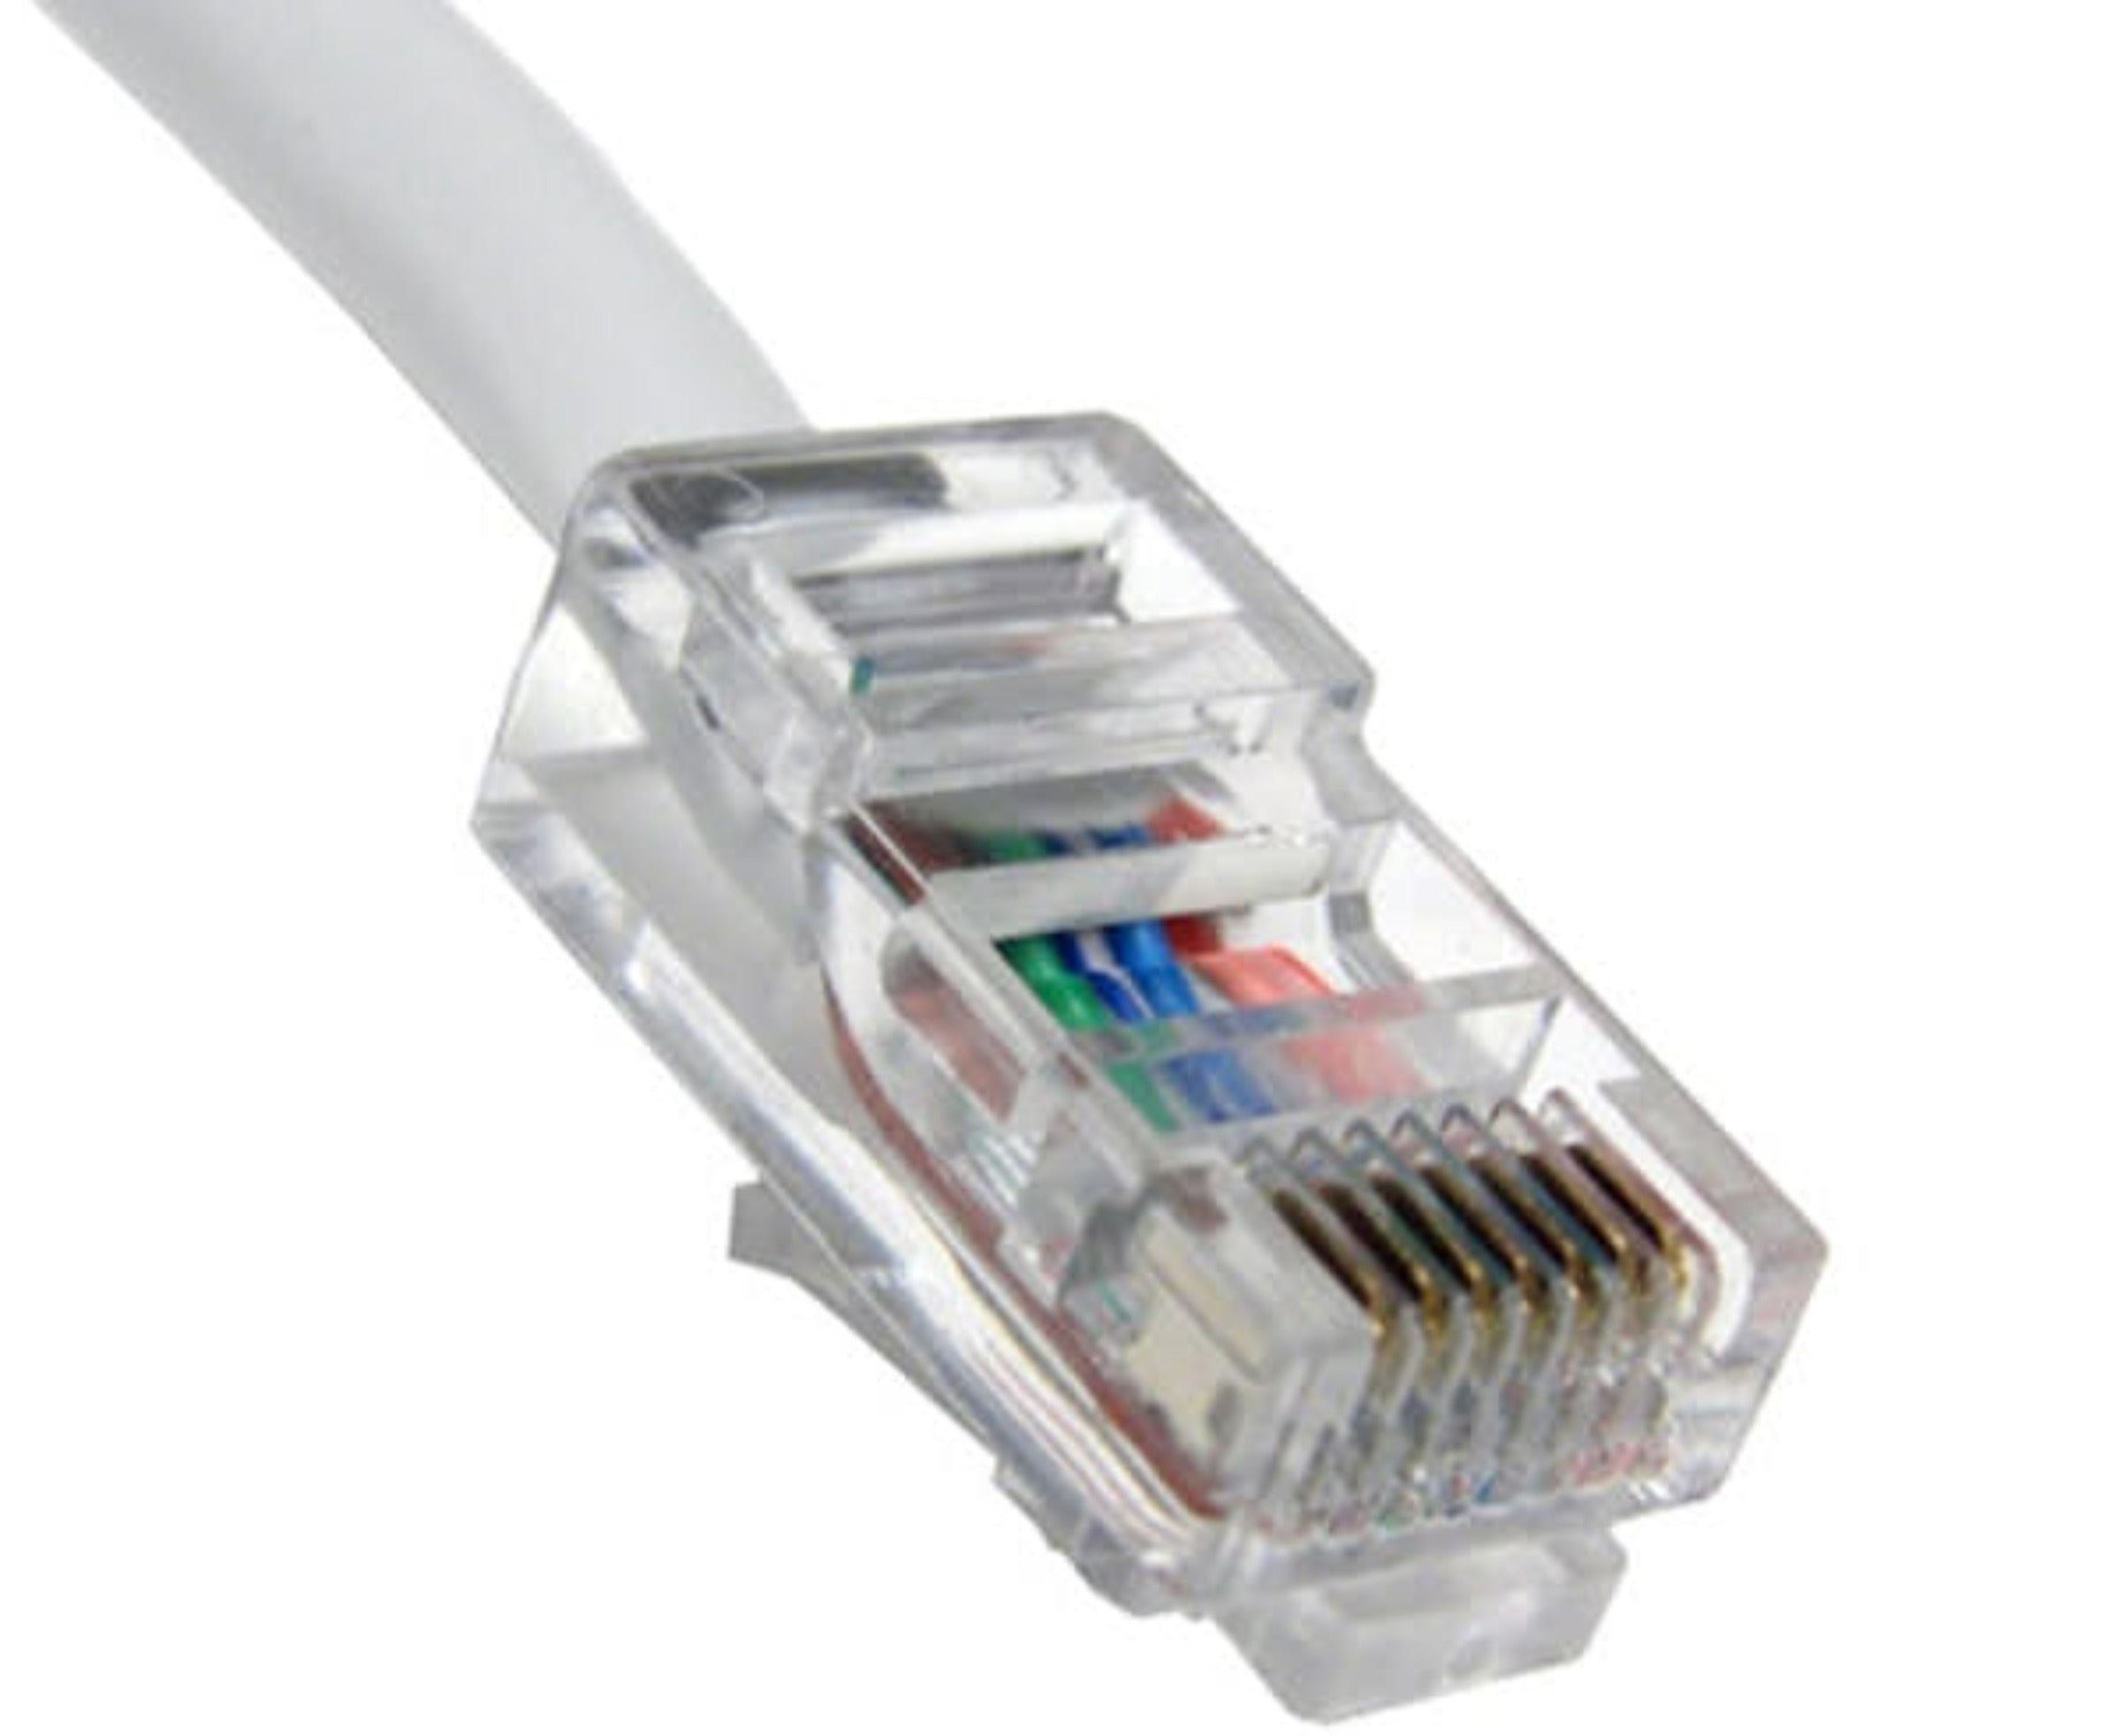 A white 0.5ft Cat5e Non-booted UTP Ethernet Patch Cable with colored wires